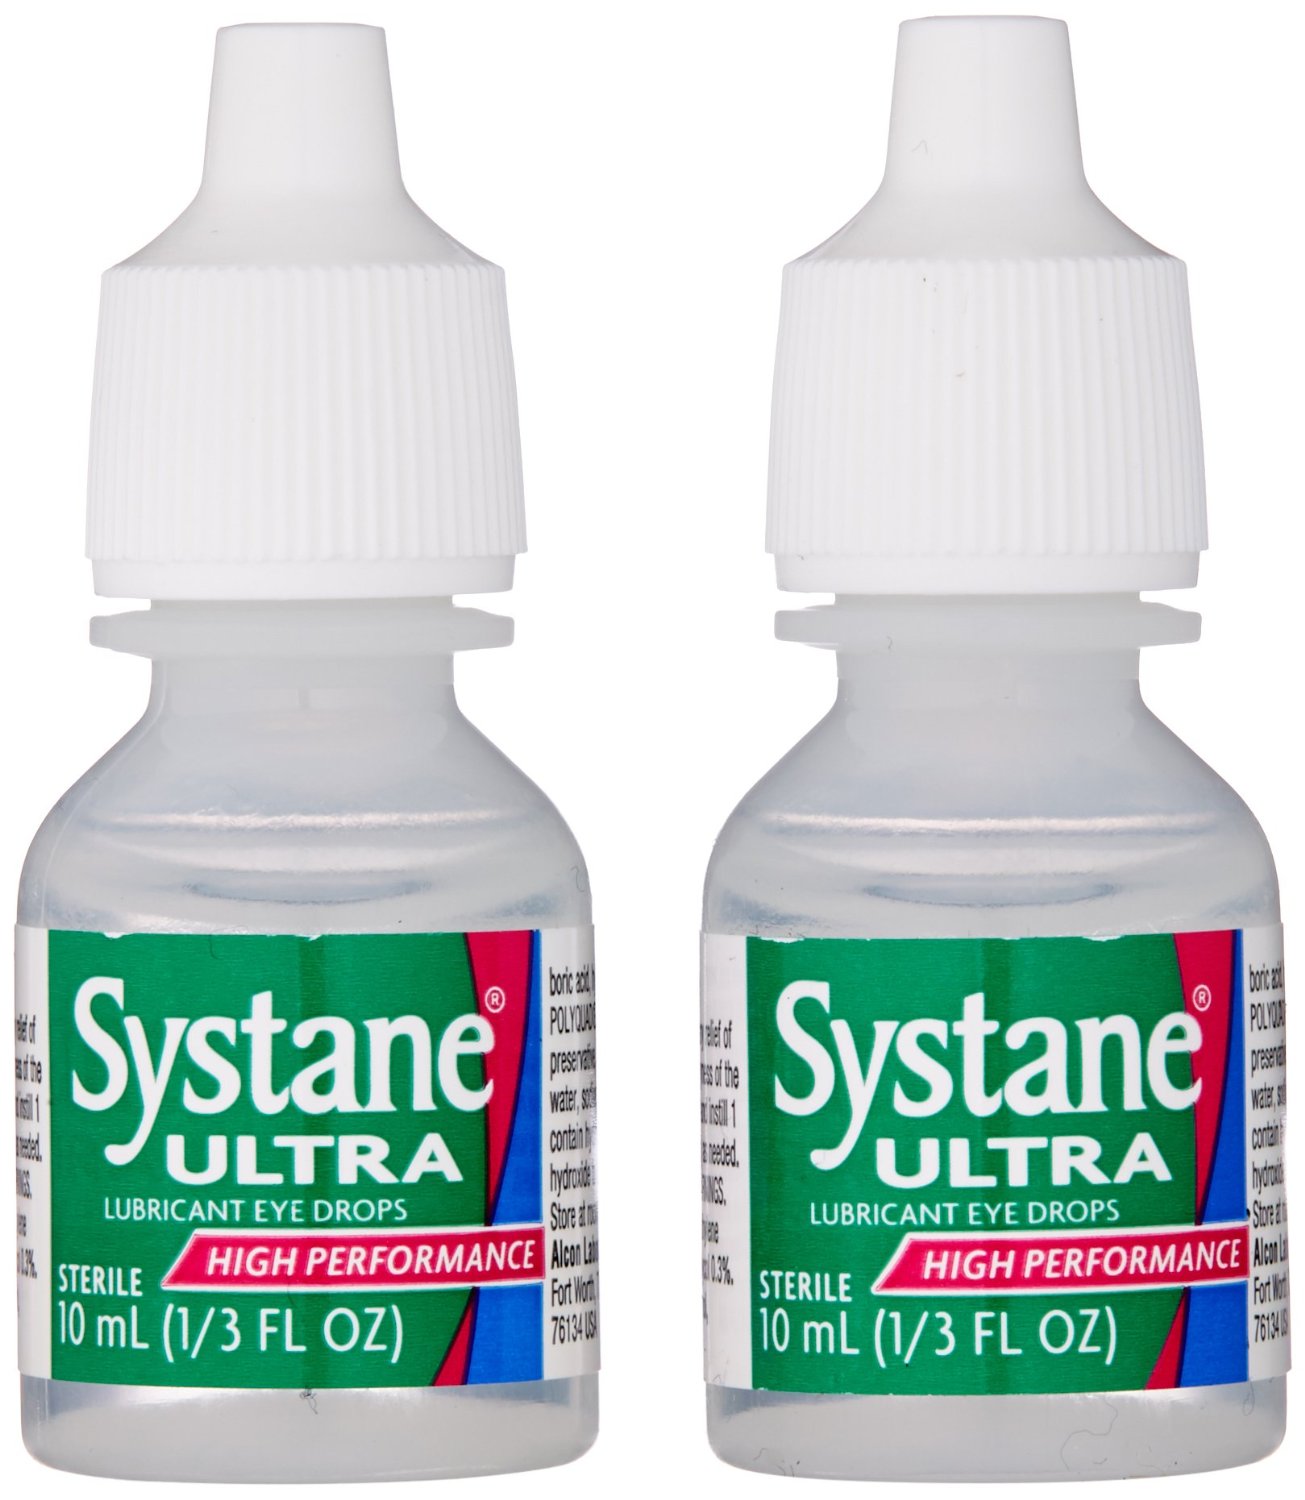 Systane Ultra Lubricant Eye Drops, 2-count – Just $8.95!